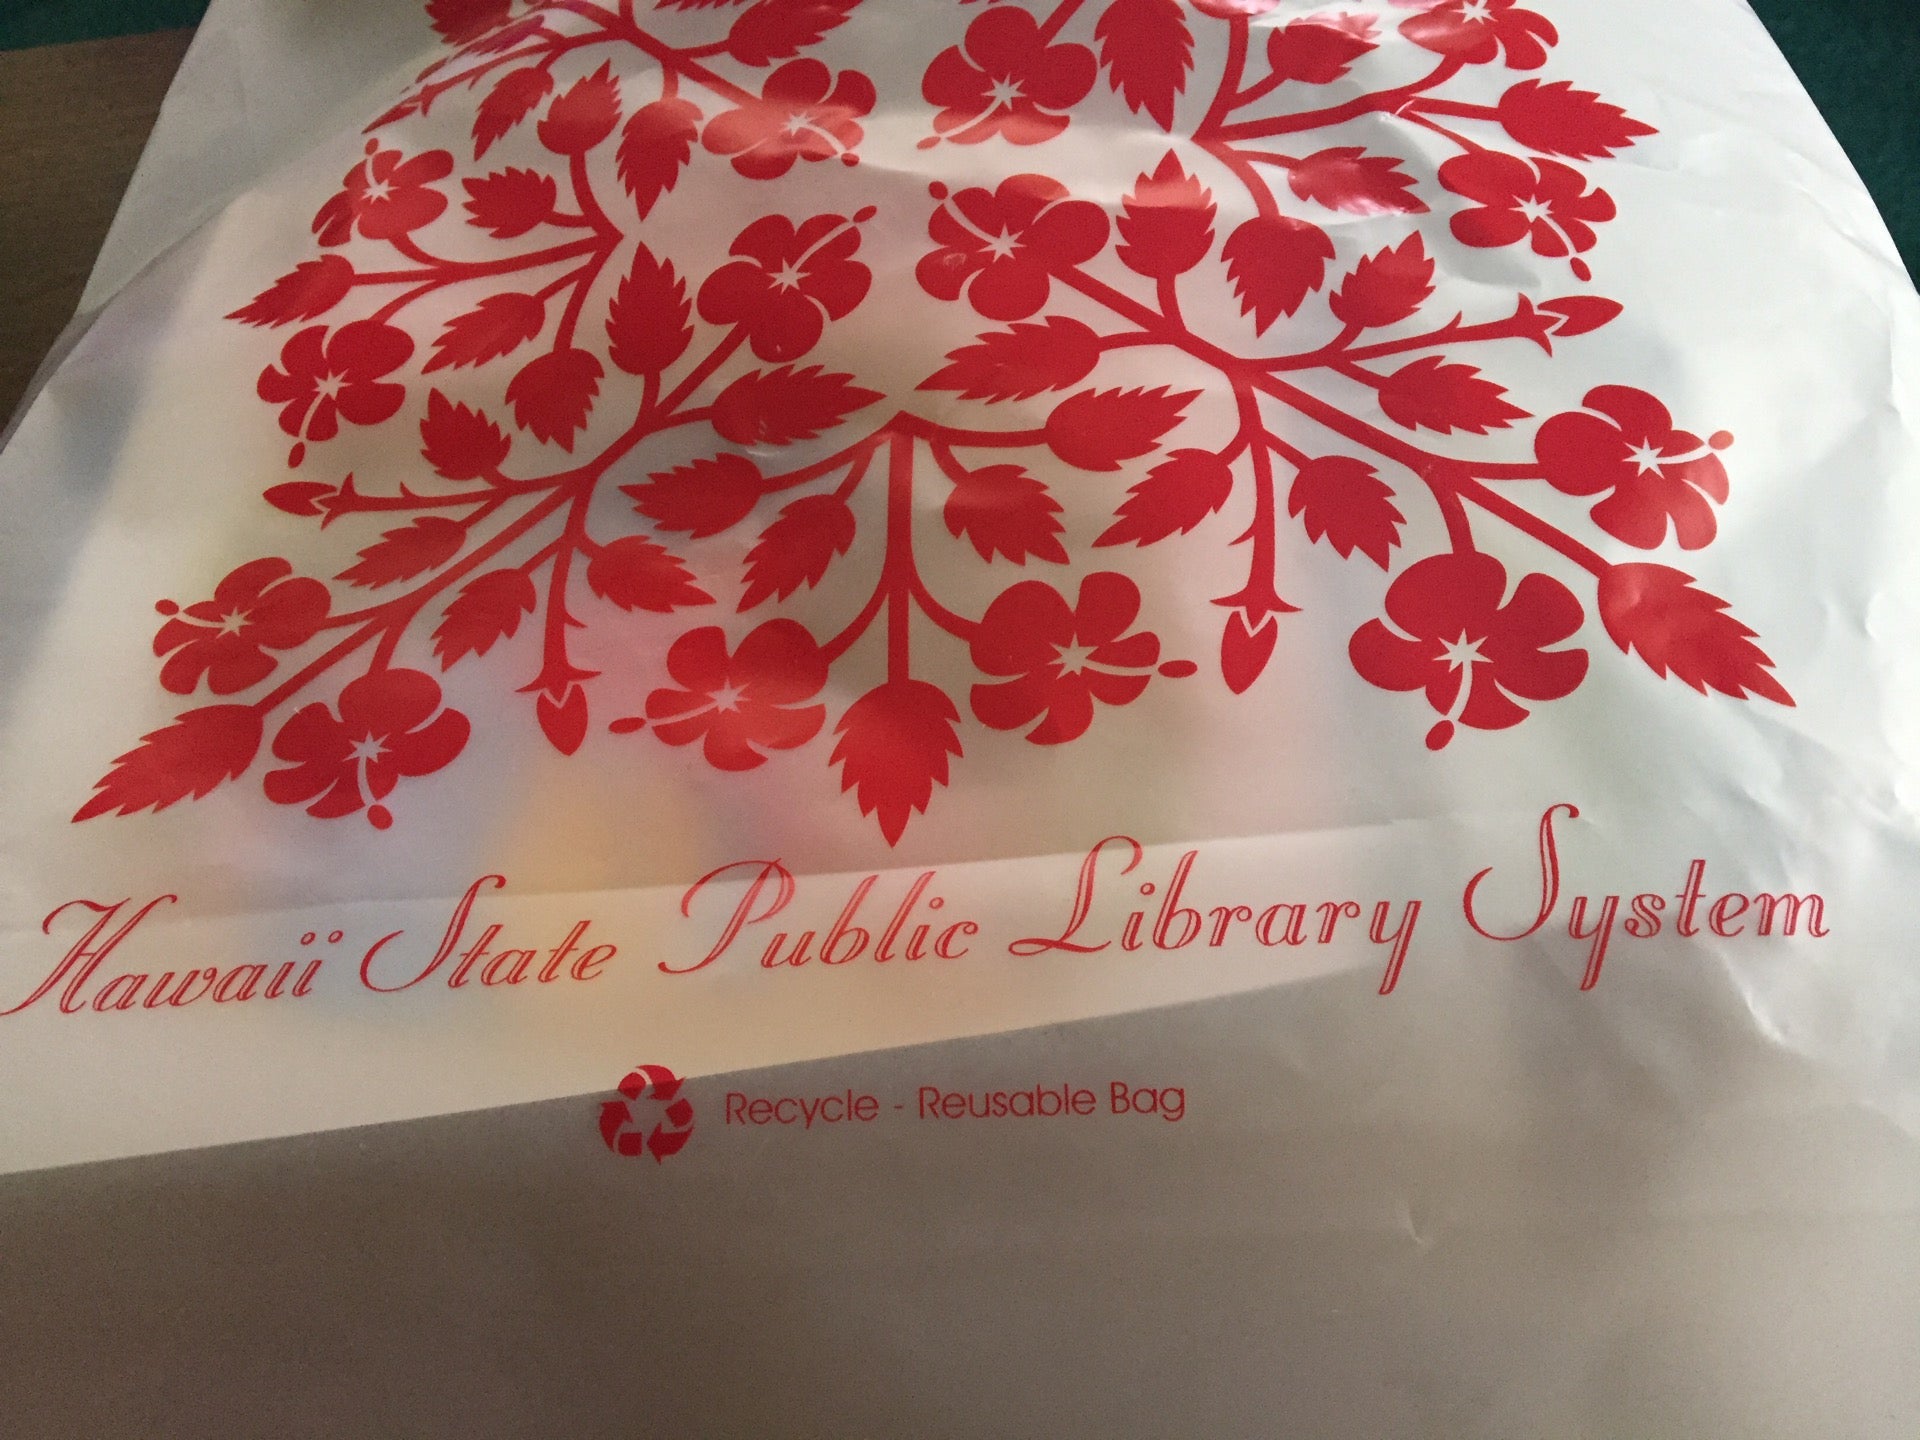 Hawaii State Public Library SystemDecorate a Book Bag